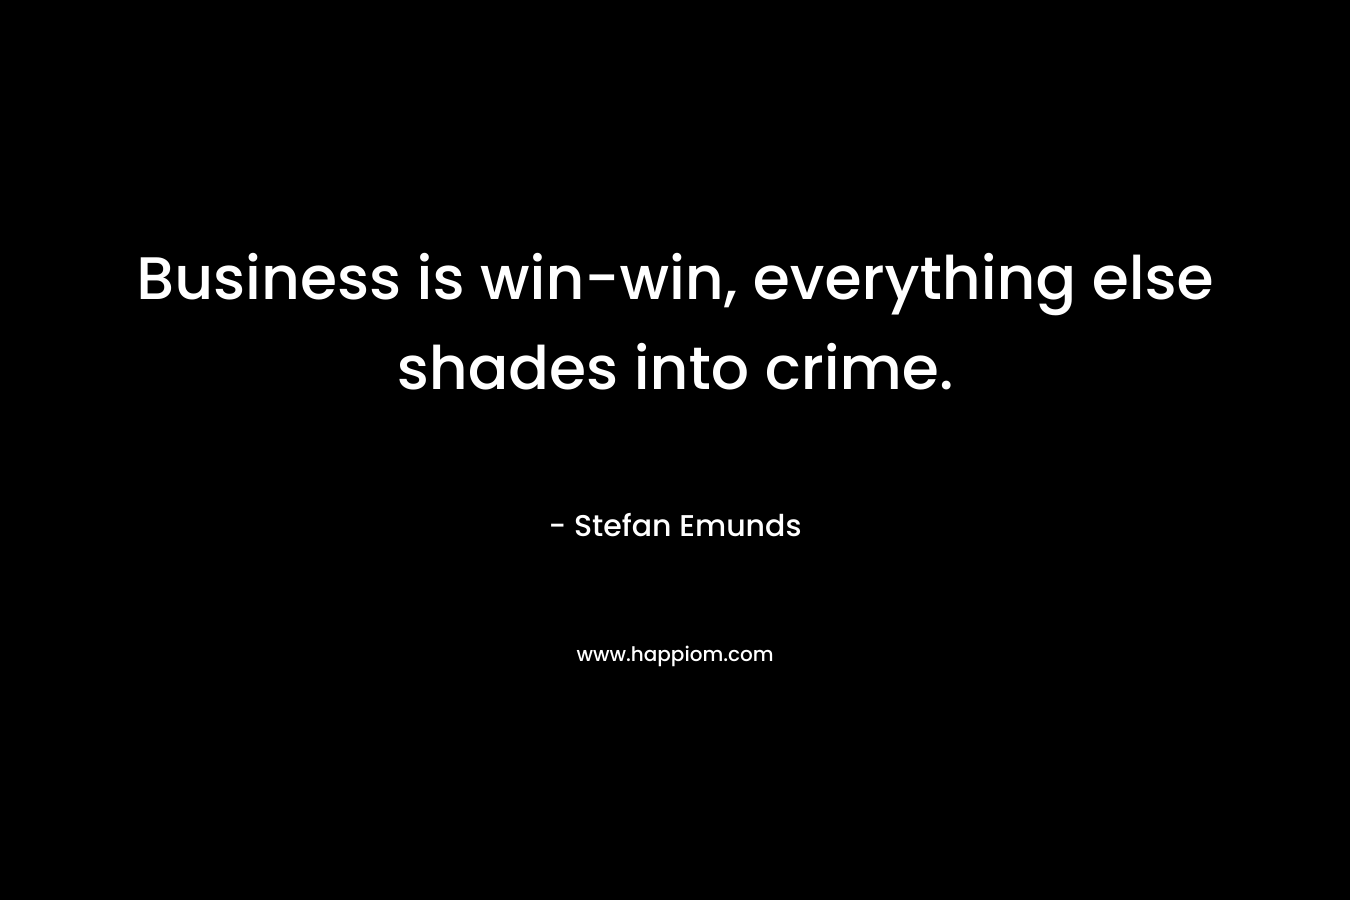 Business is win-win, everything else shades into crime.